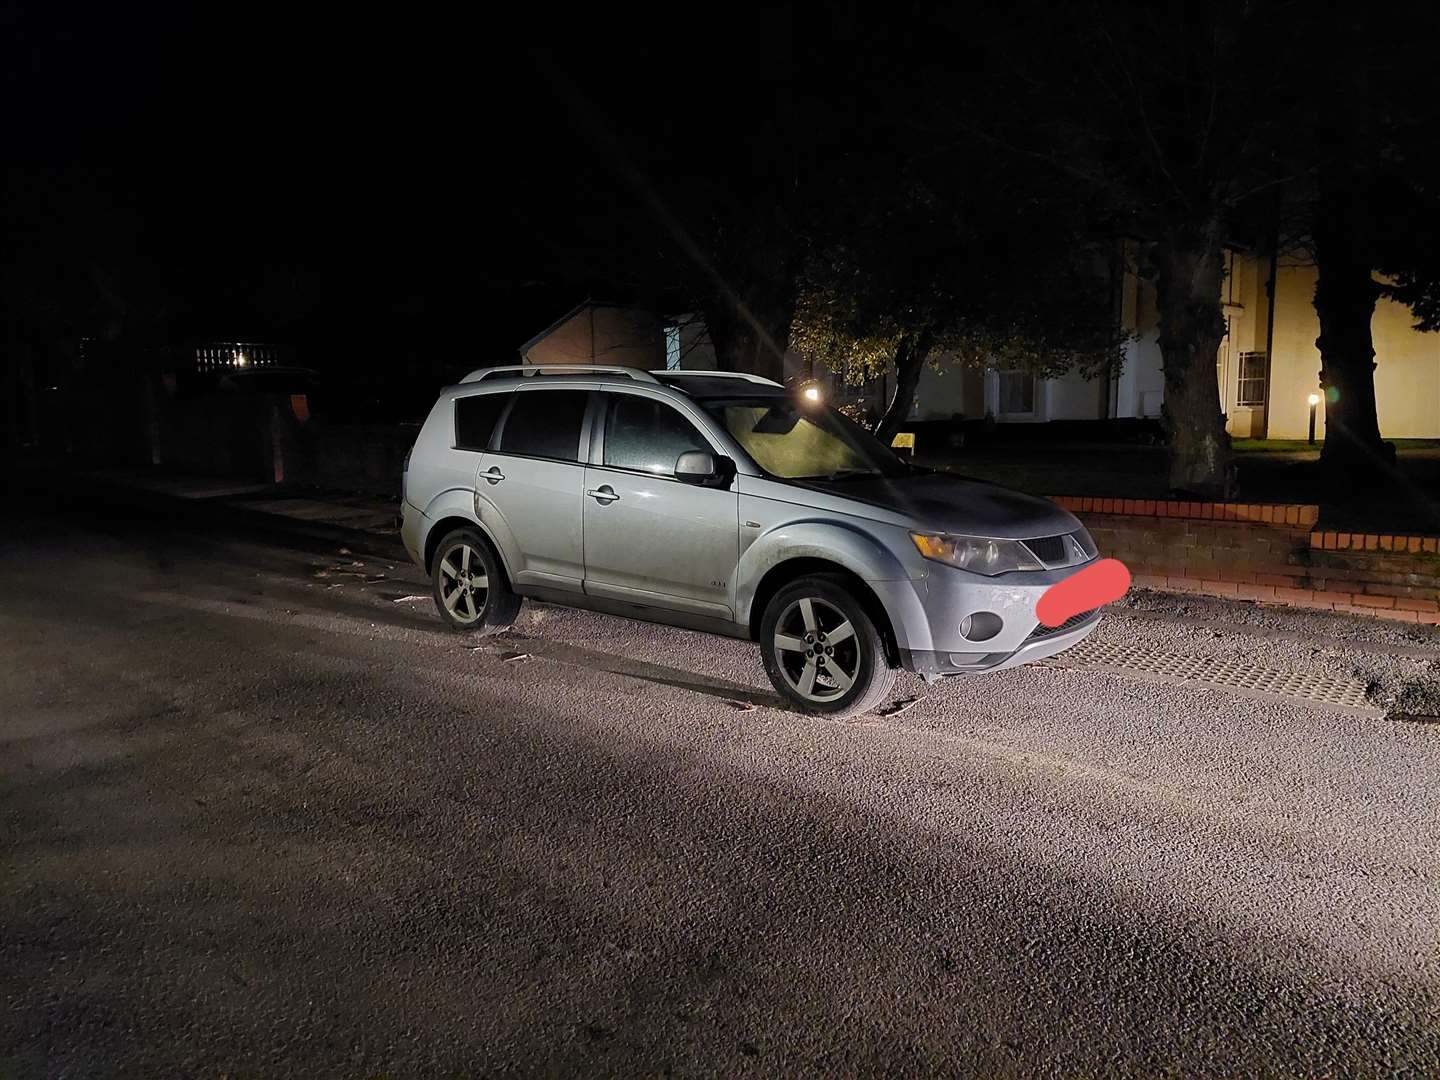 Ipswich Police seized the car as it was parked too close to a junction. Picture: Ipswich Police